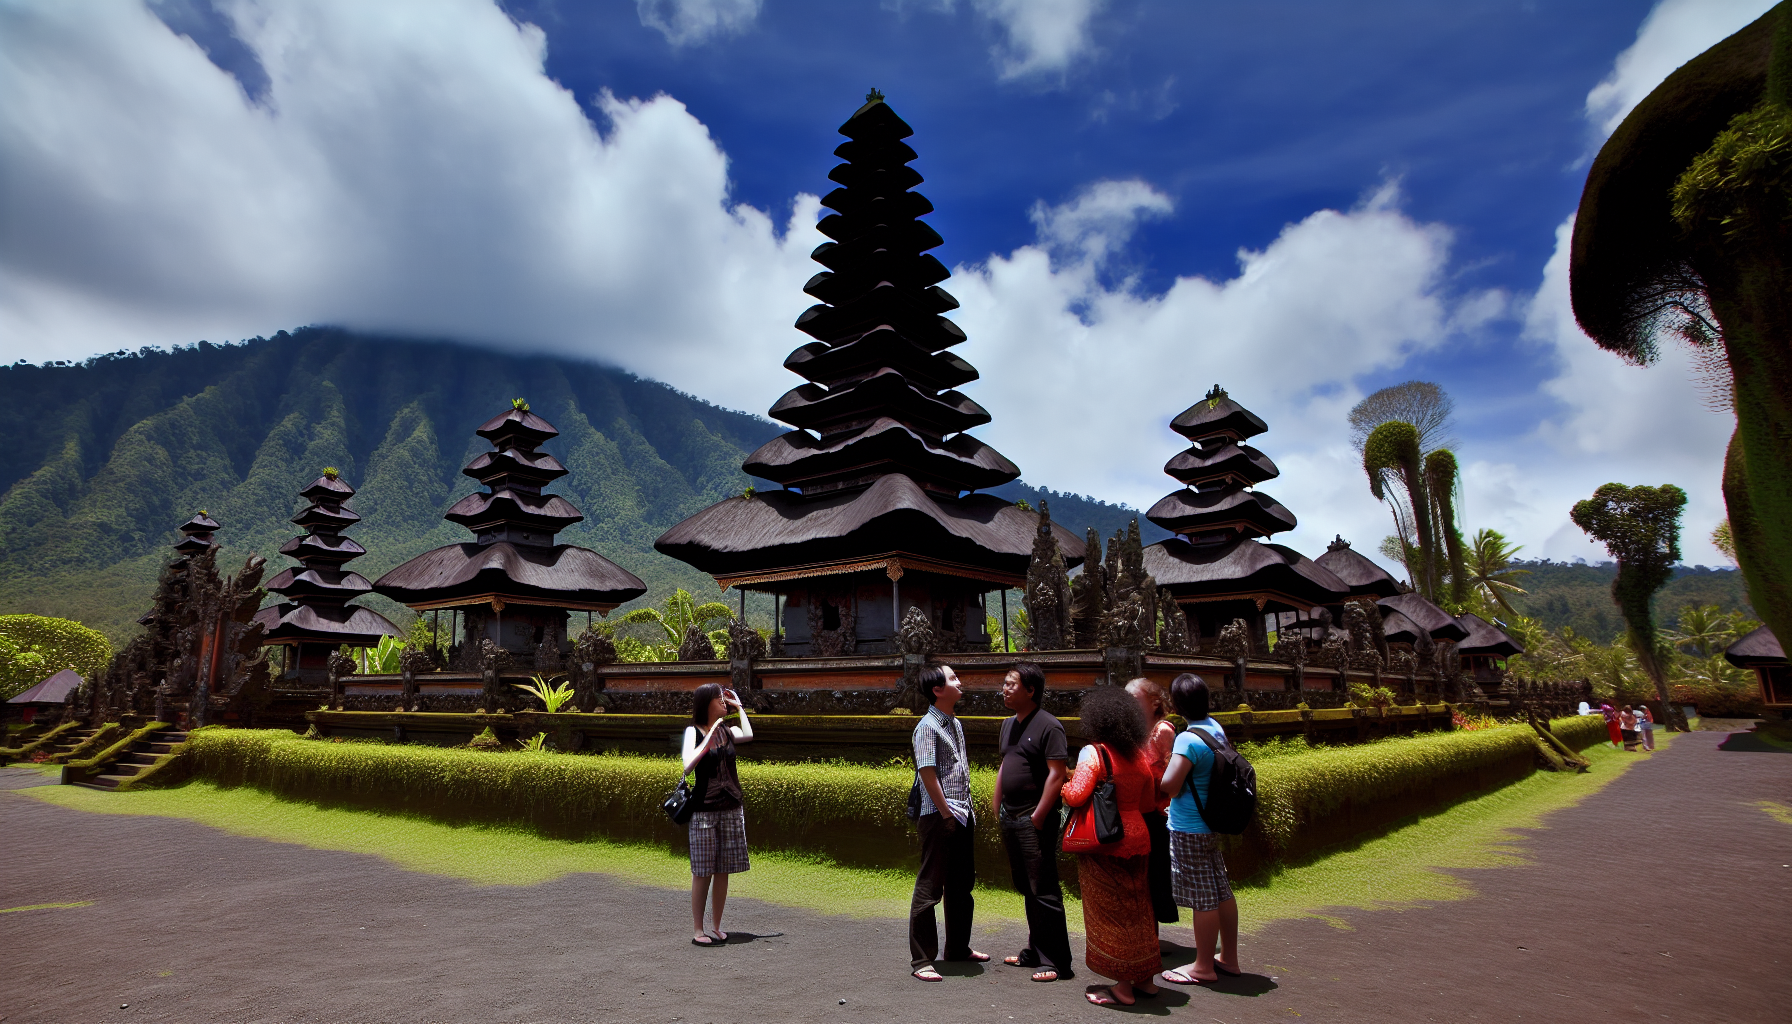 Besakih Temple with Mount Agung in the background